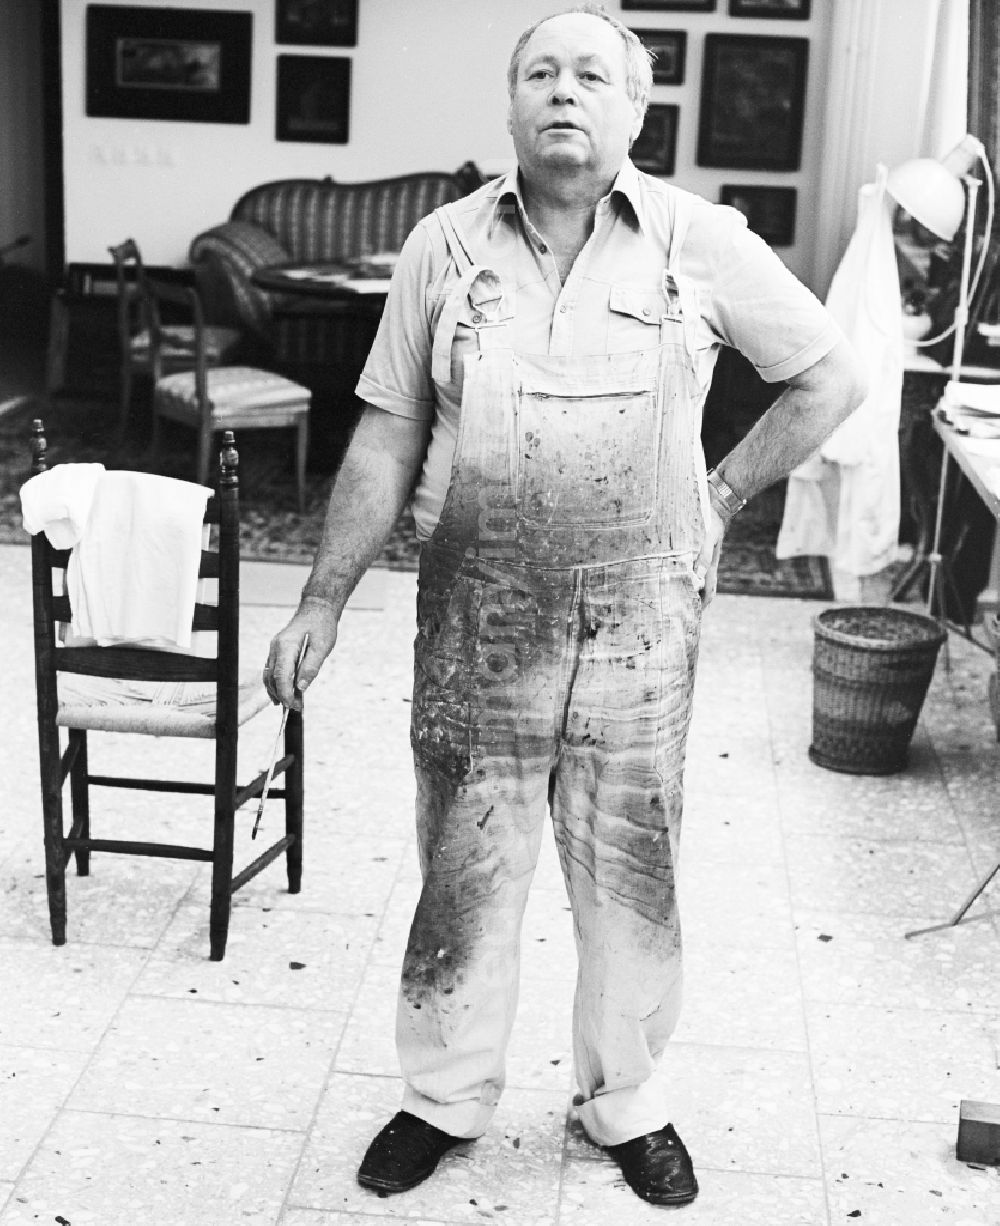 Berlin: Professor Walter Womacka in his studio in Berlin-Mitte on Fisherman's Island. Womacka was considered one of the most outstanding representatives of socialist realism, his art continues to shape the face of East Berlin. He directed twenty years as rector of the Art Academy Berlin-Weissensee